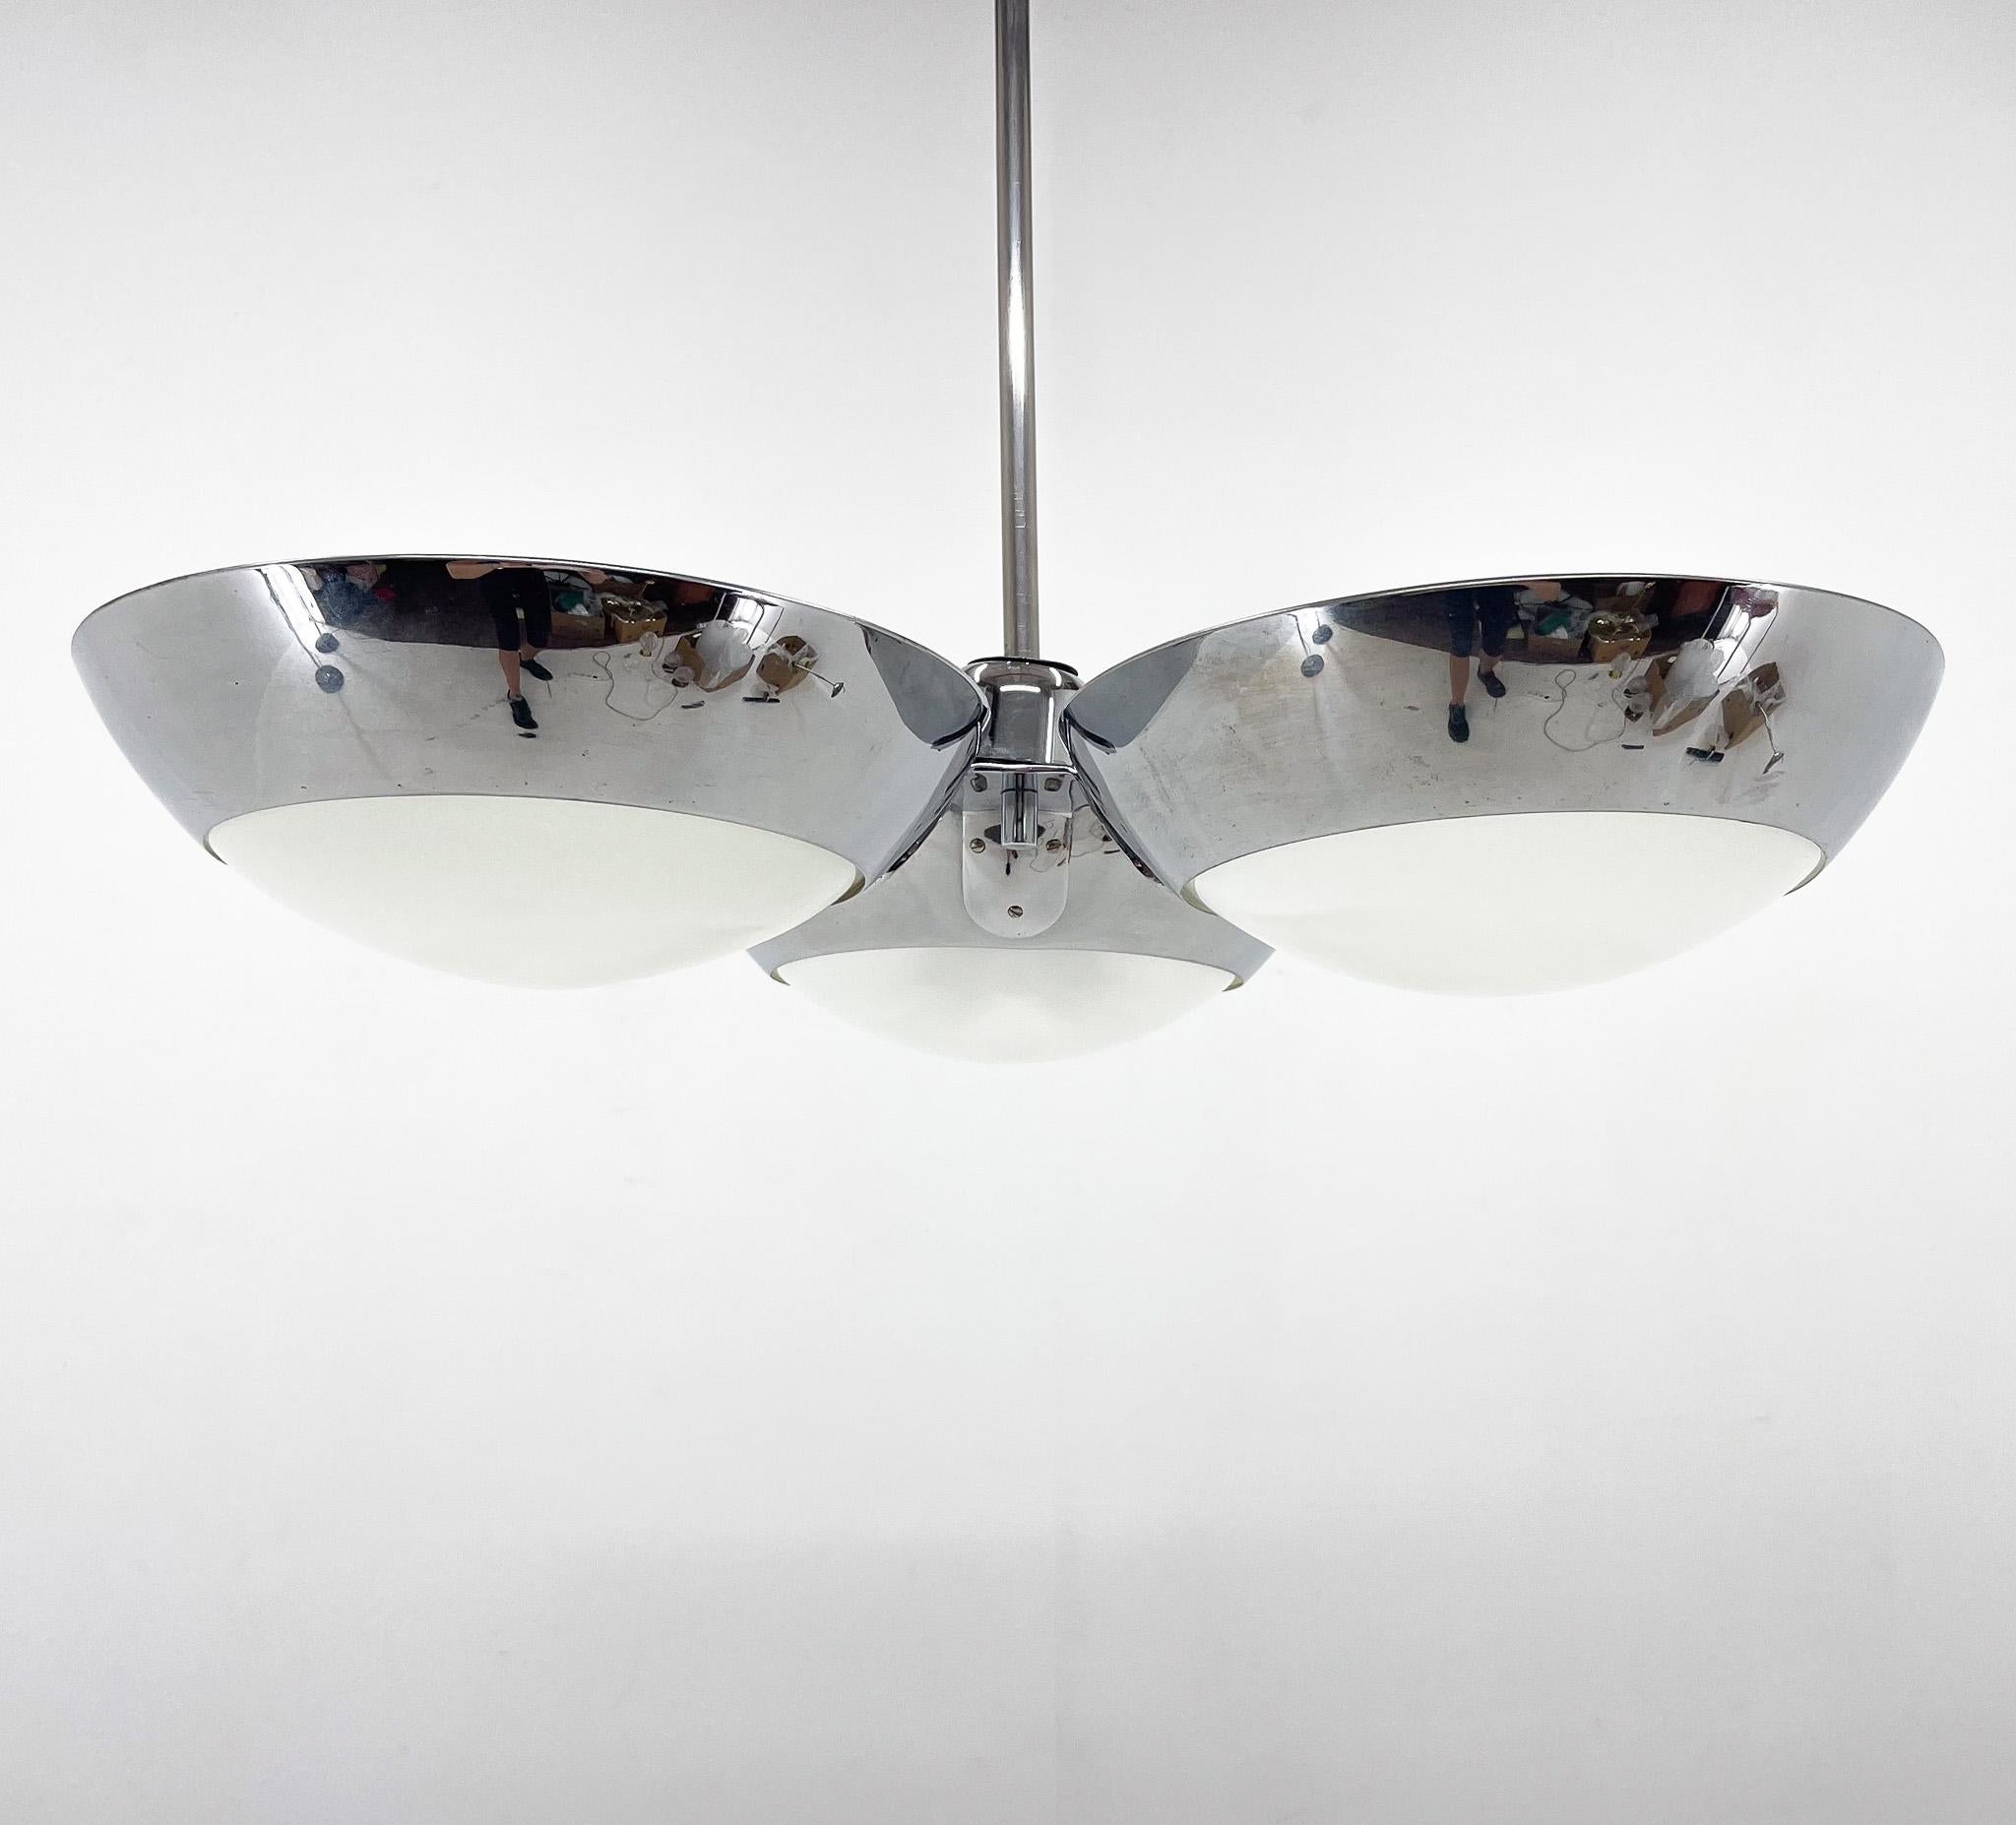 Rare Chrome-Plated Functionalist Chandelier by Zukov, 1940s For Sale 3